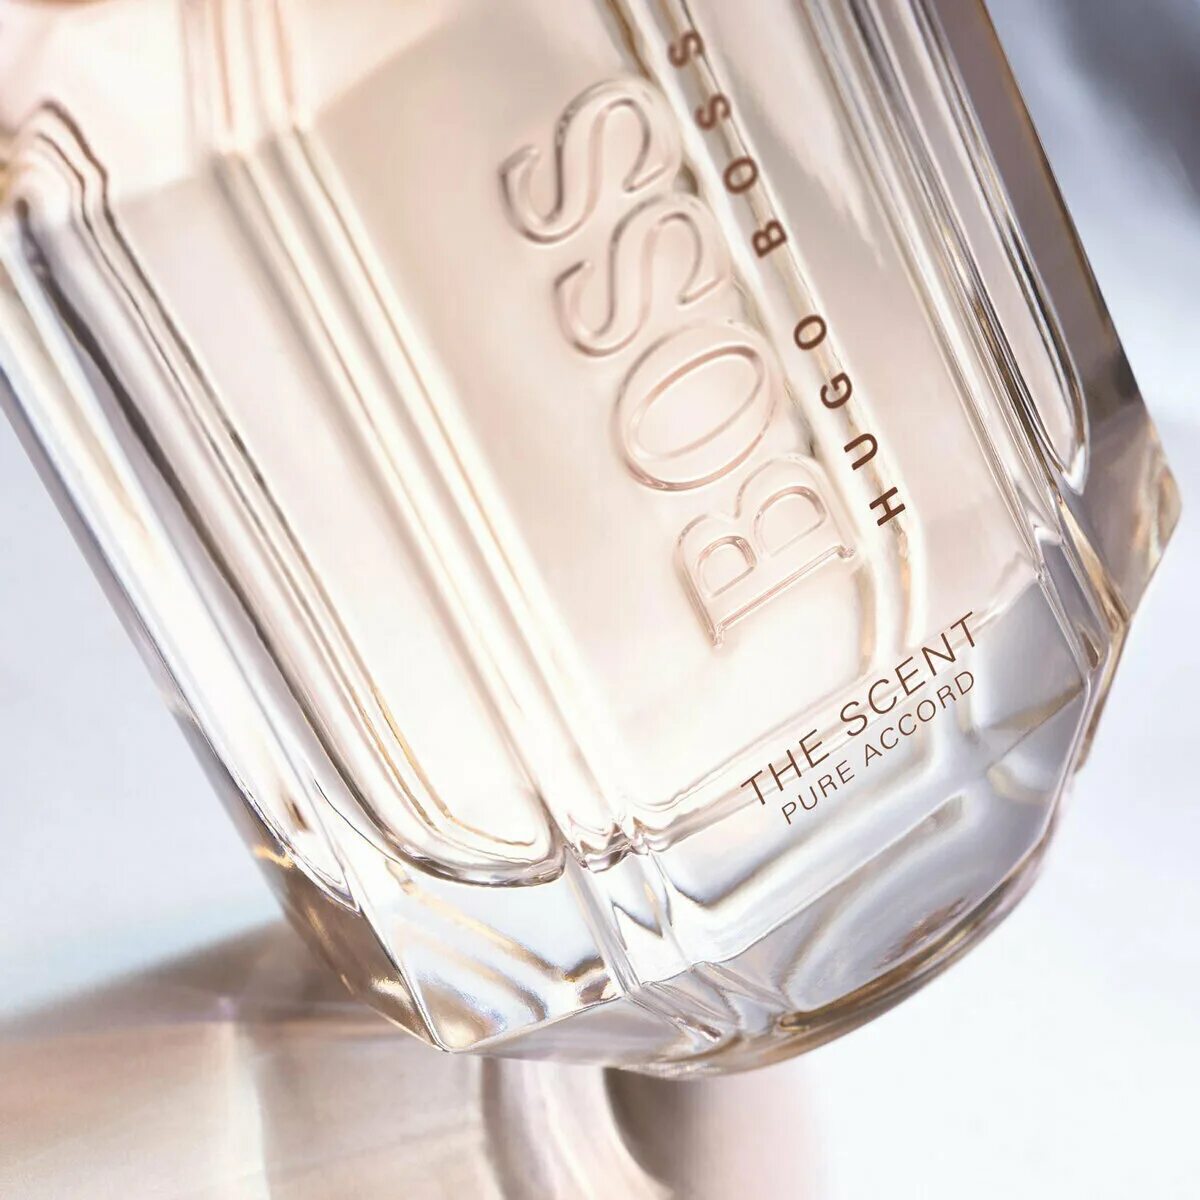 Парфюмерная вода boss the scent for her. Hugo Boss the Scent Pure Accord for her. Boss the Scent Pure Accord женский. Hugo Boss the Scent Pure Accord. Hugo Boss "the Scent Pure Accord" 100 ml.